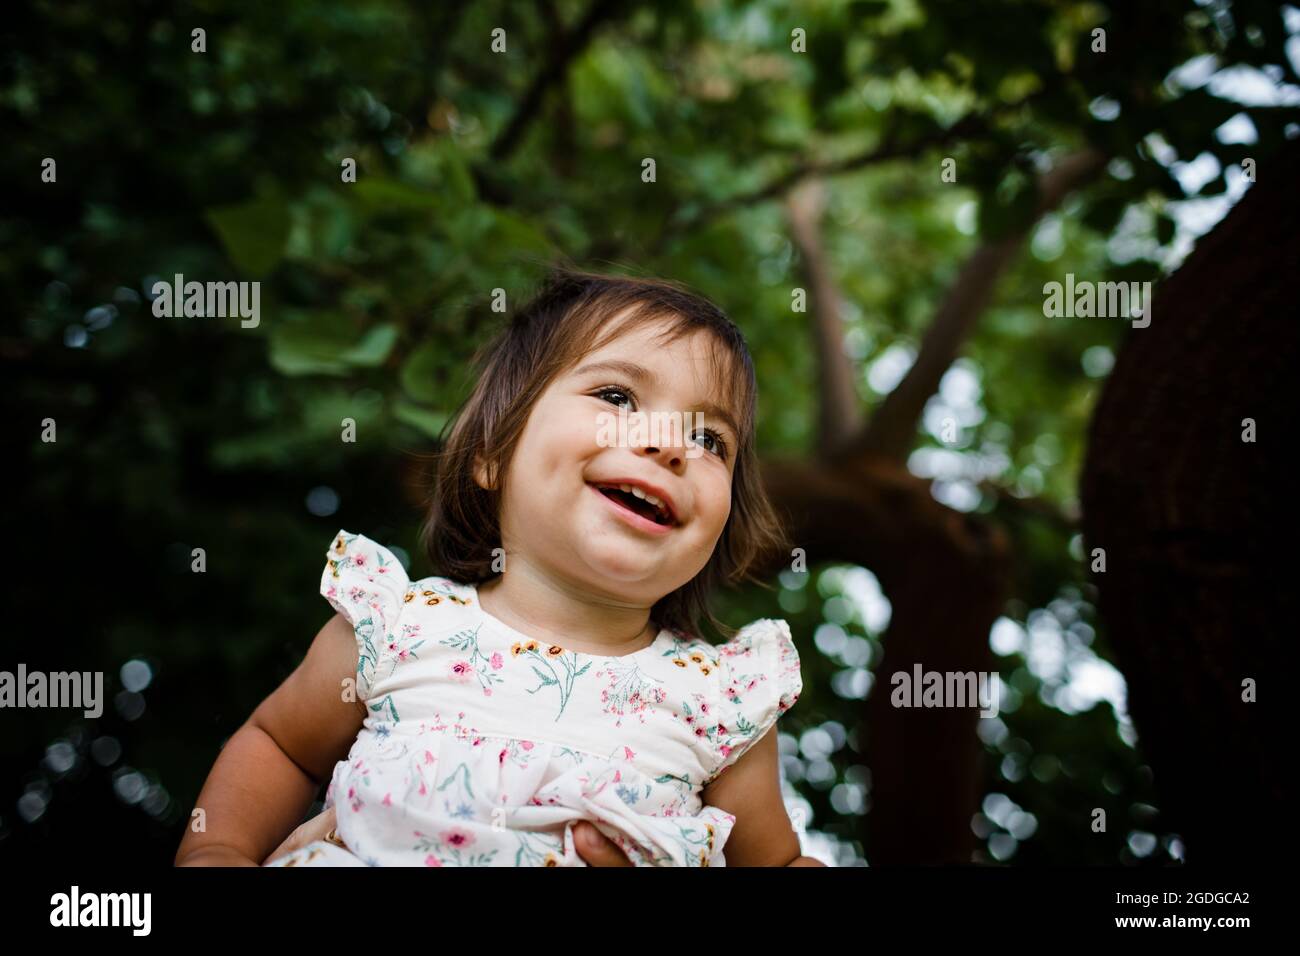 One Year Old Sitting in Tree & Smiling in San Diego Stock Photo